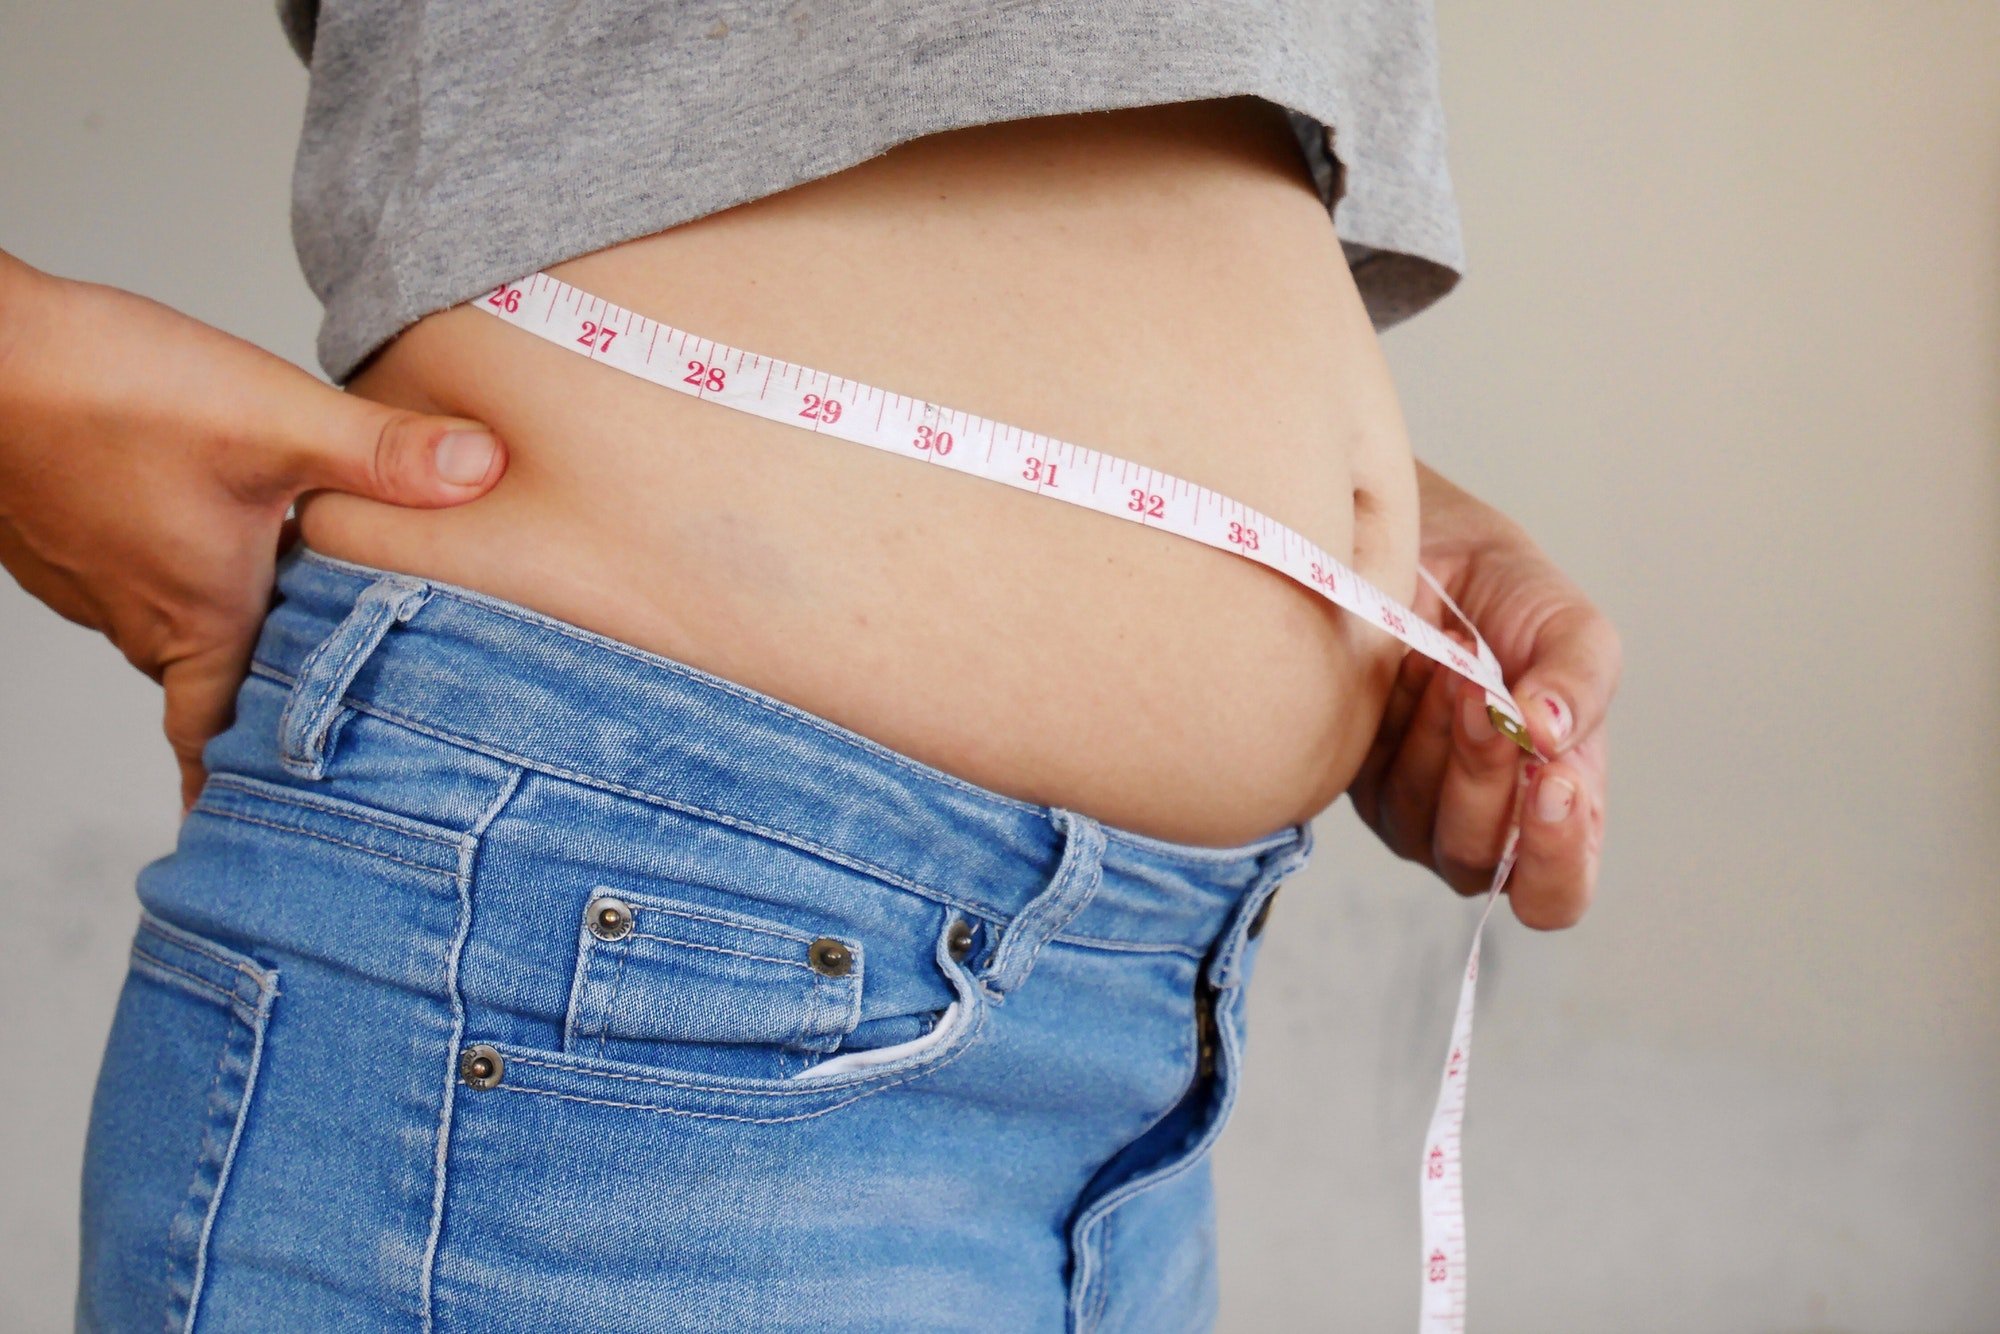 10 Steps To Stop Overeating